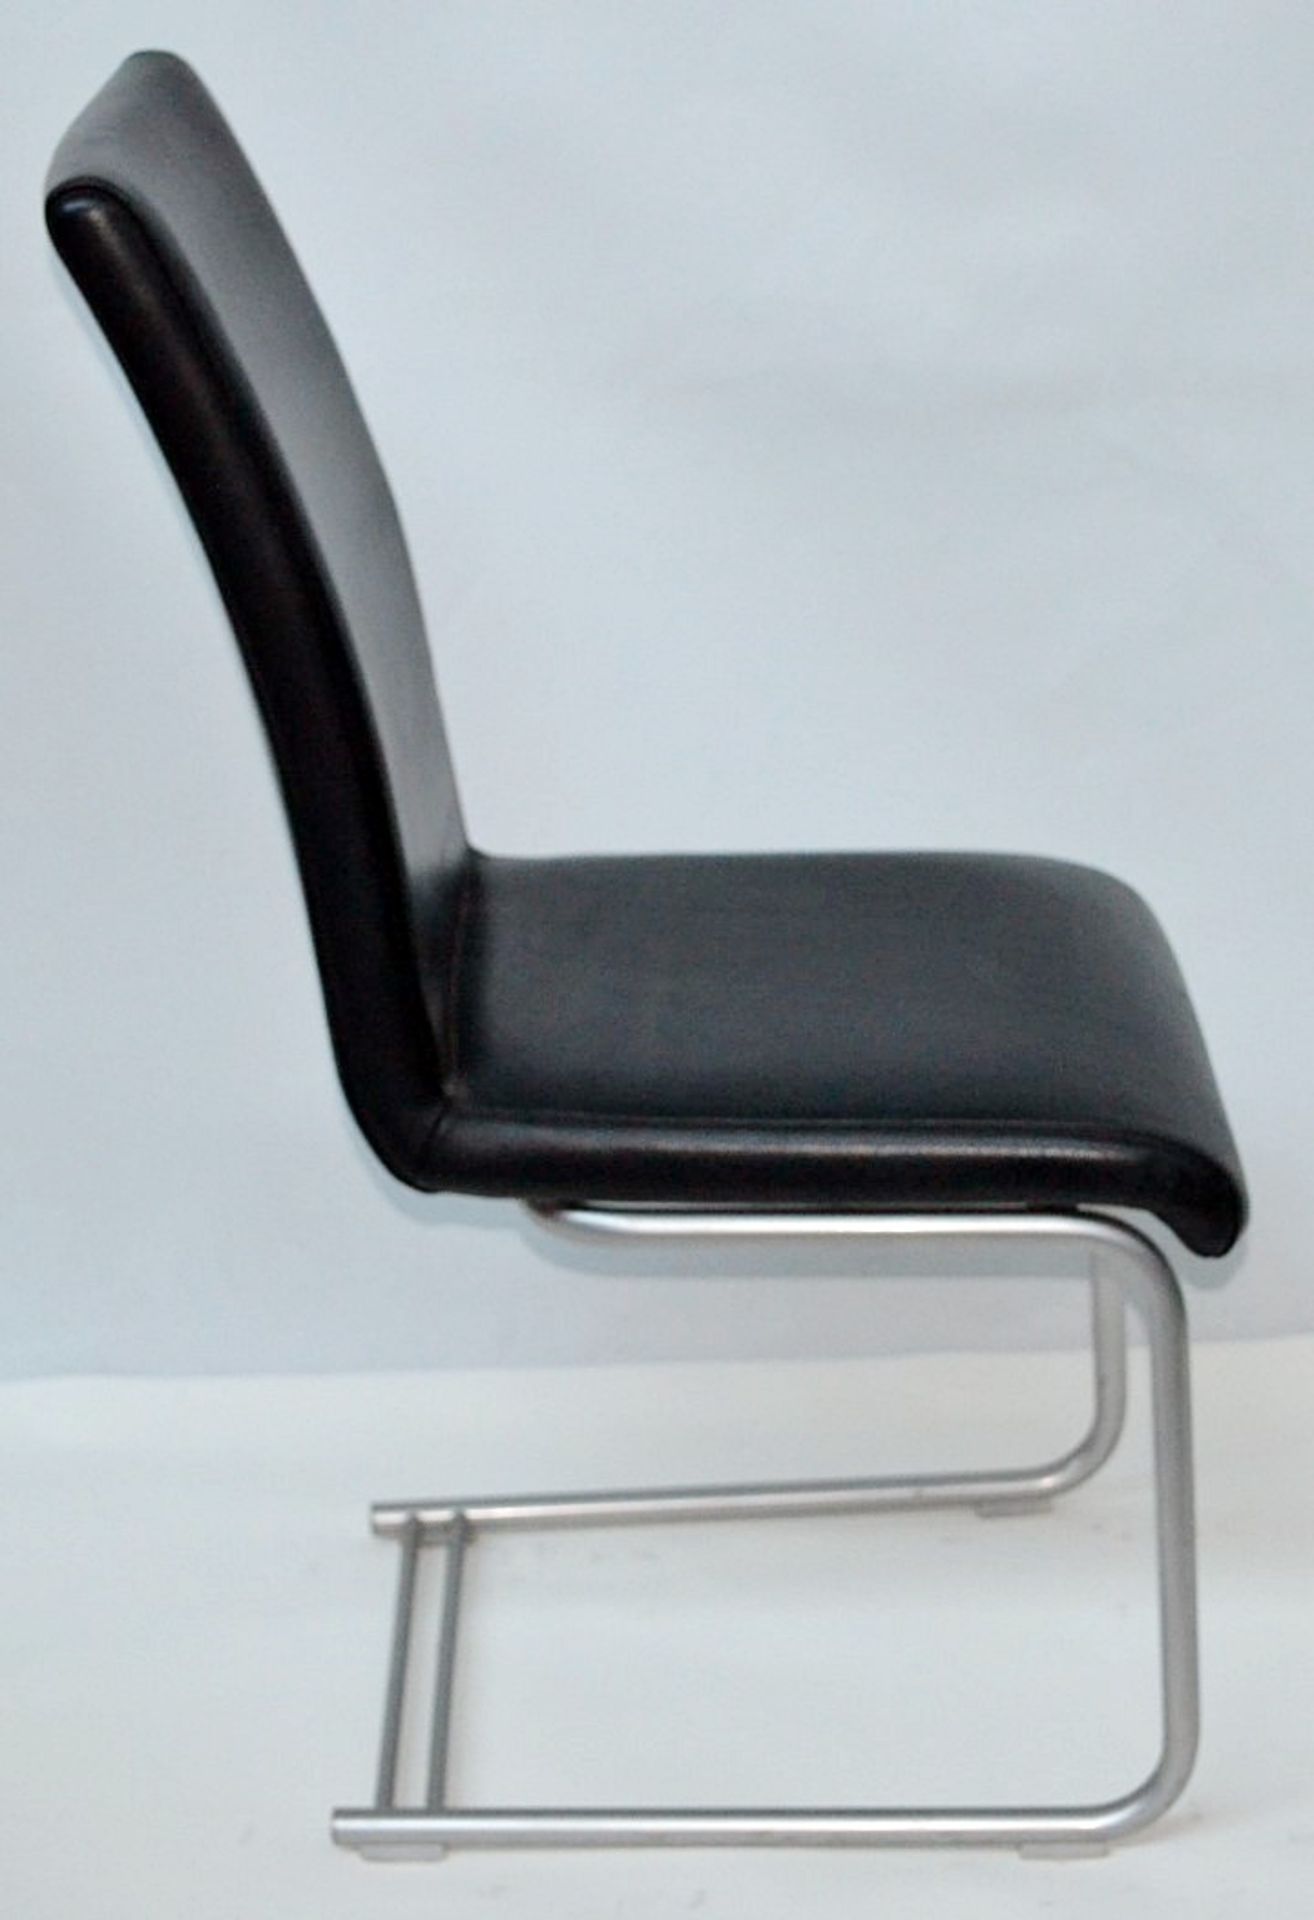 6 x Matching VENJAKOB "Let's Go" Dining Chairs - Expertly Upholstered In Black Leather With Metal Ca - Image 9 of 9